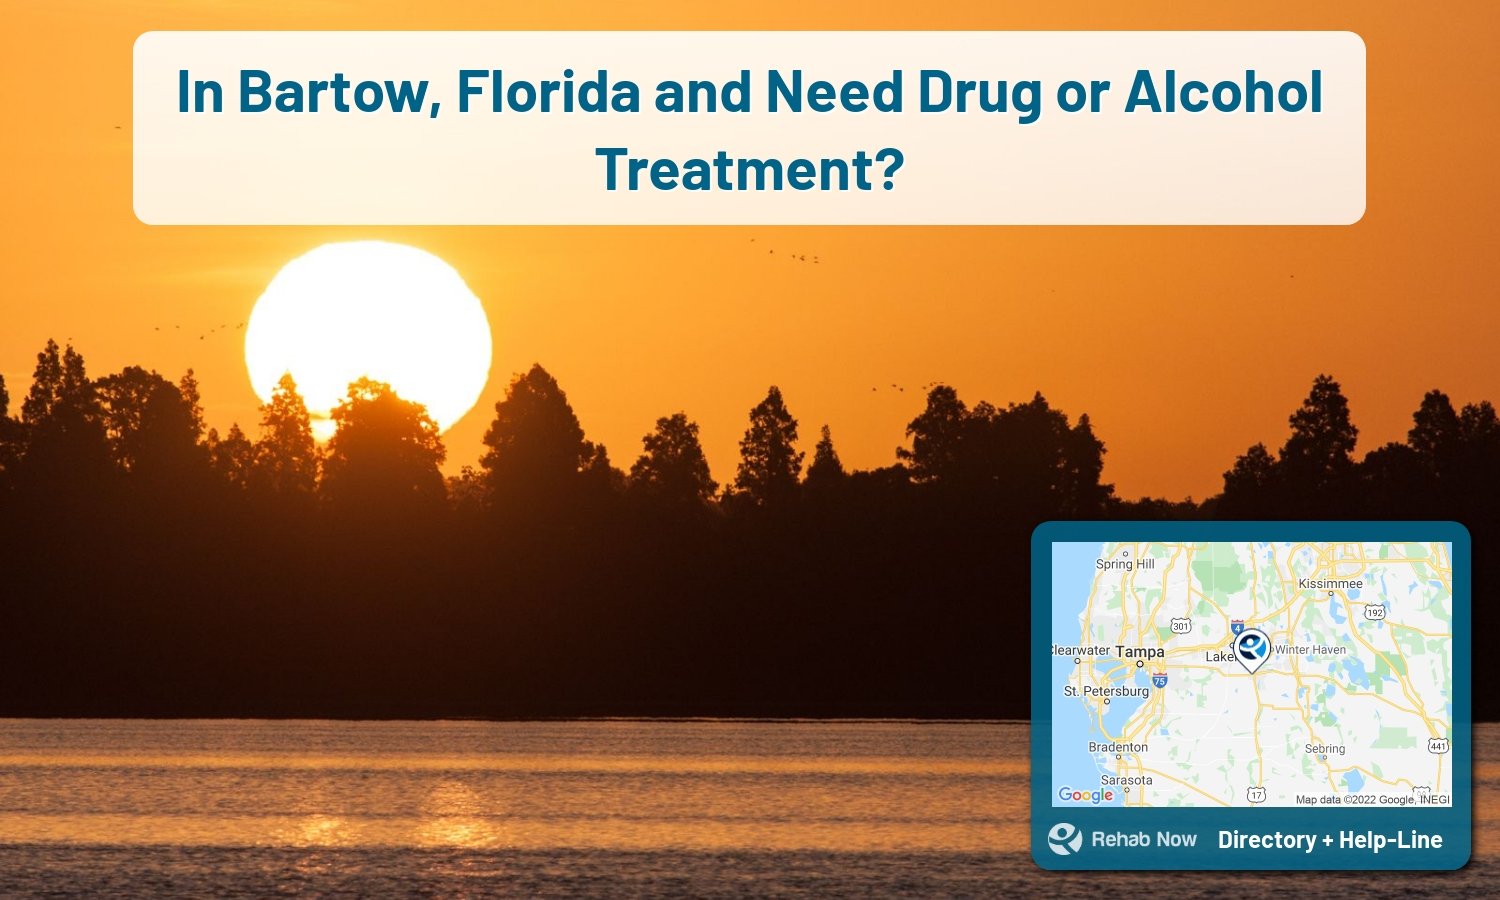 View options, availability, treatment methods, and more, for drug rehab and alcohol treatment in Bartow, Florida